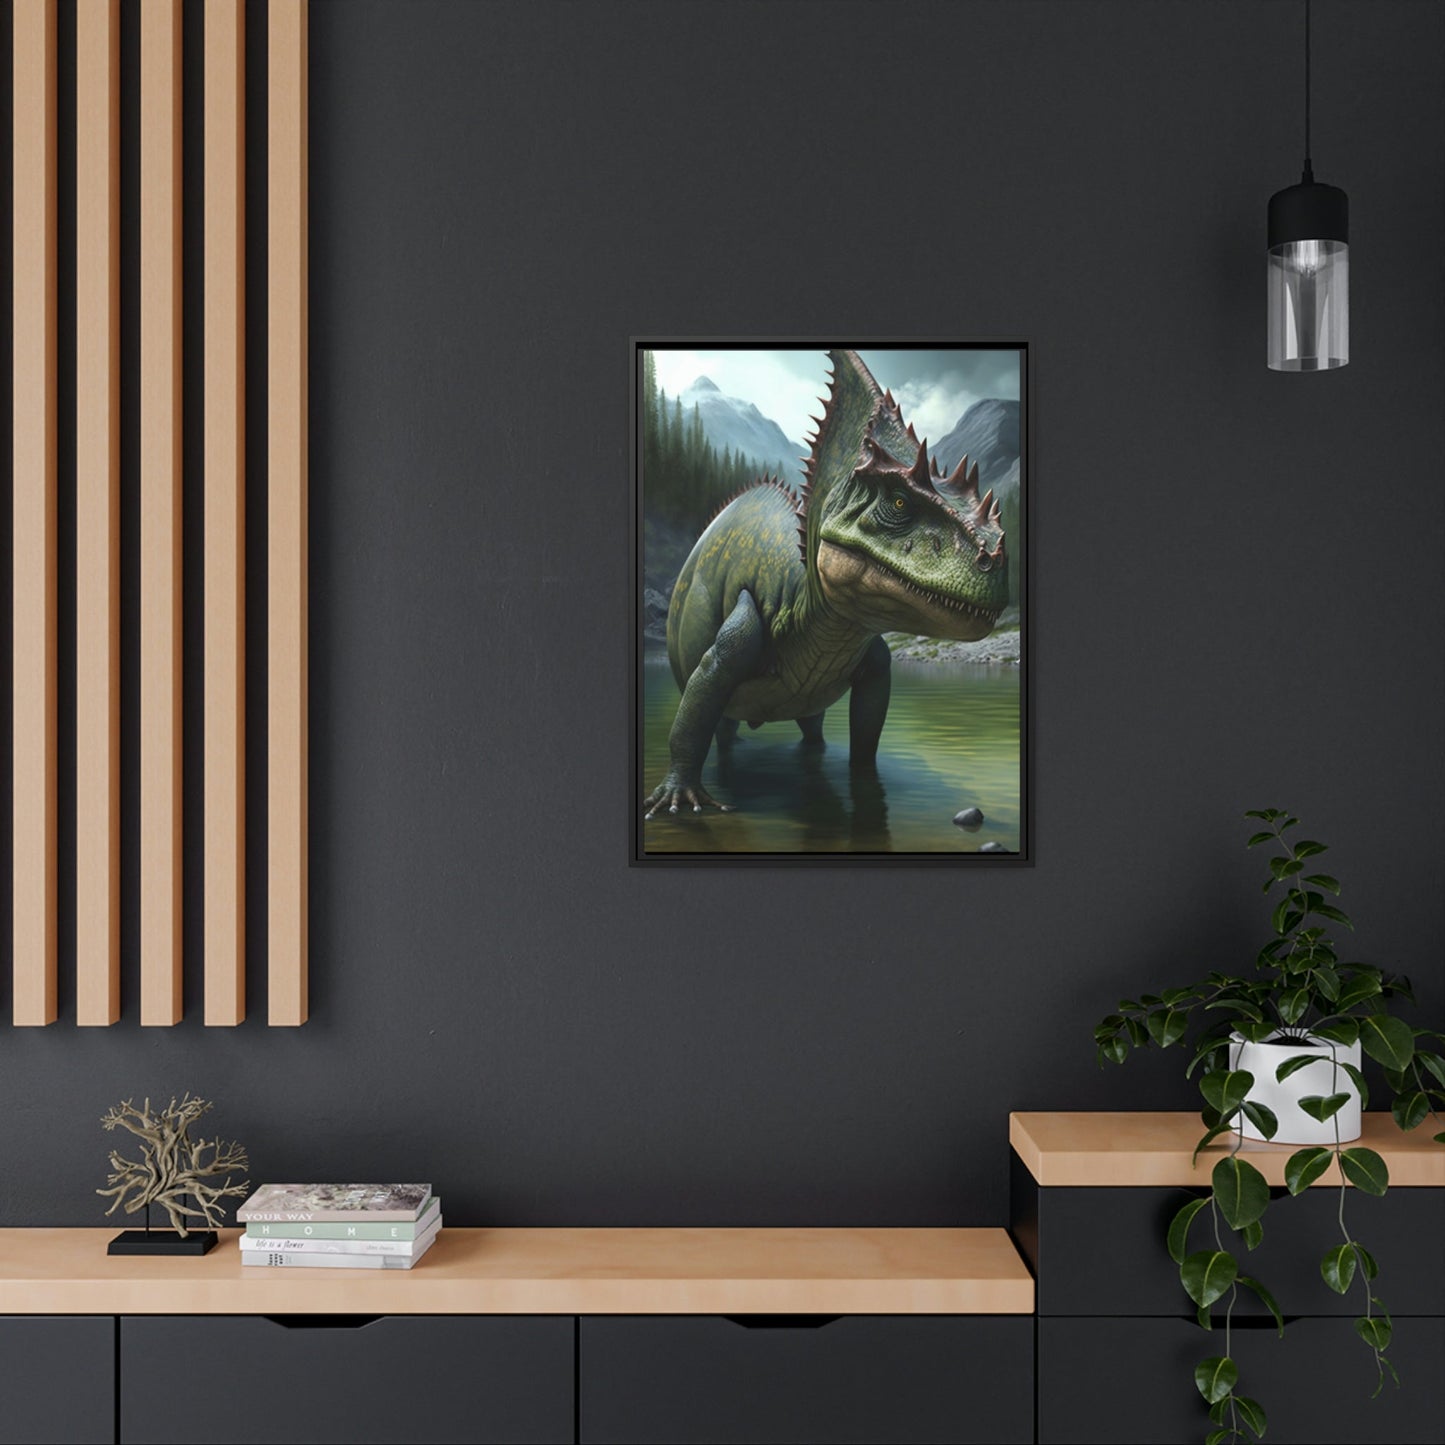 Jurassic Dreams: Canvas & Poster of Dinosaurs and Imagination